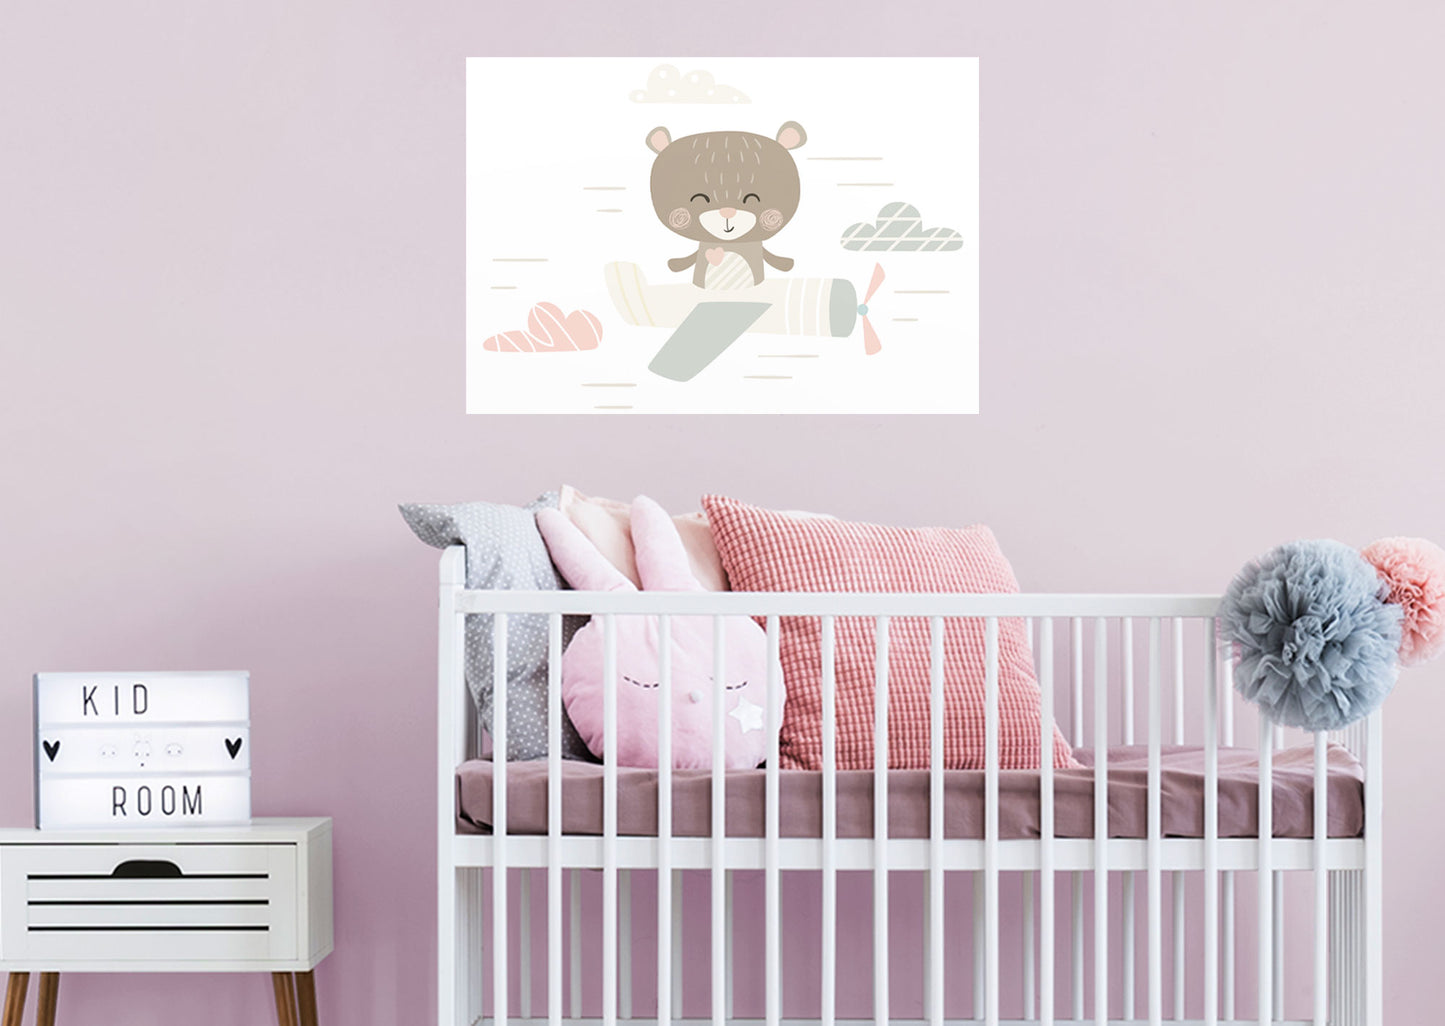 Nursery: Planes Zen Bear Mural        -   Removable Wall   Adhesive Decal